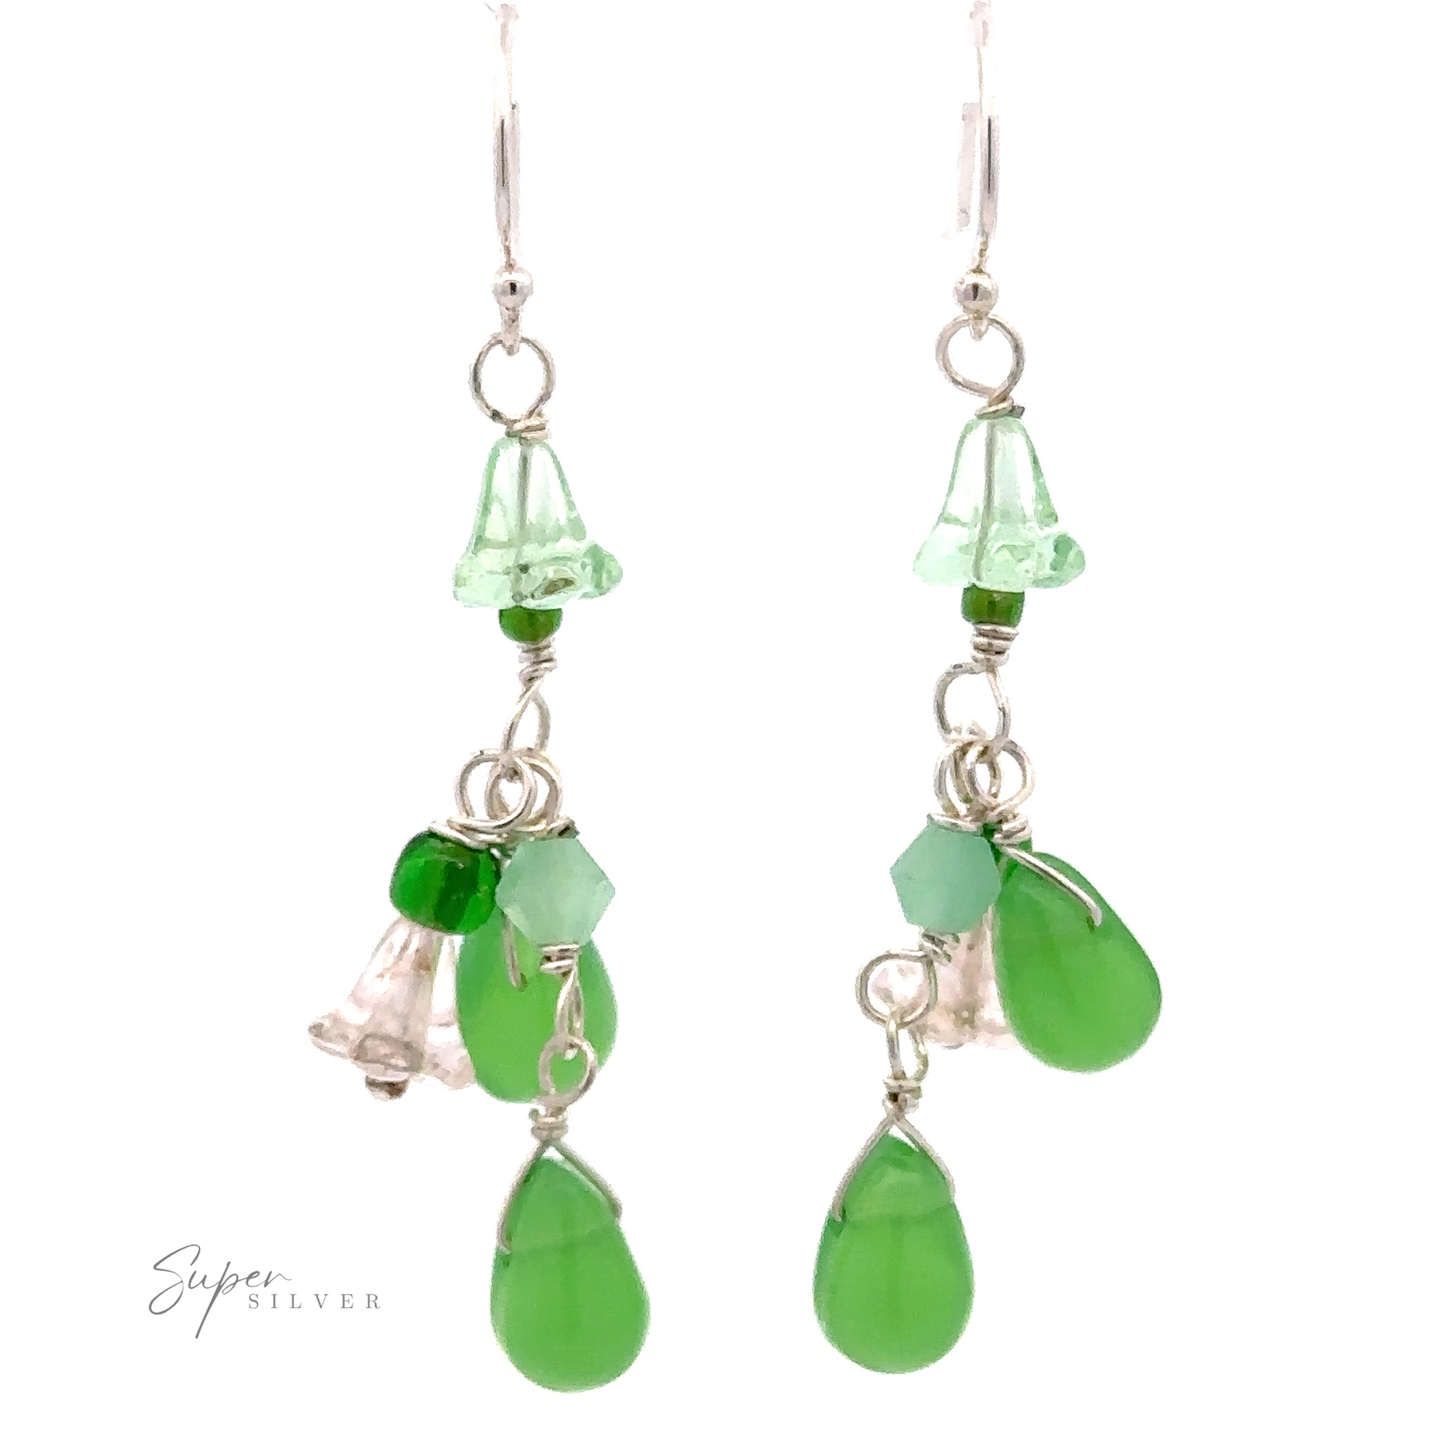 
                  
                    A pair of Playful Green Dangle Earrings with teardrop and bell-shaped elements, multicolored beads, delicate wirework, and .925 Sterling Silver accents.
                  
                